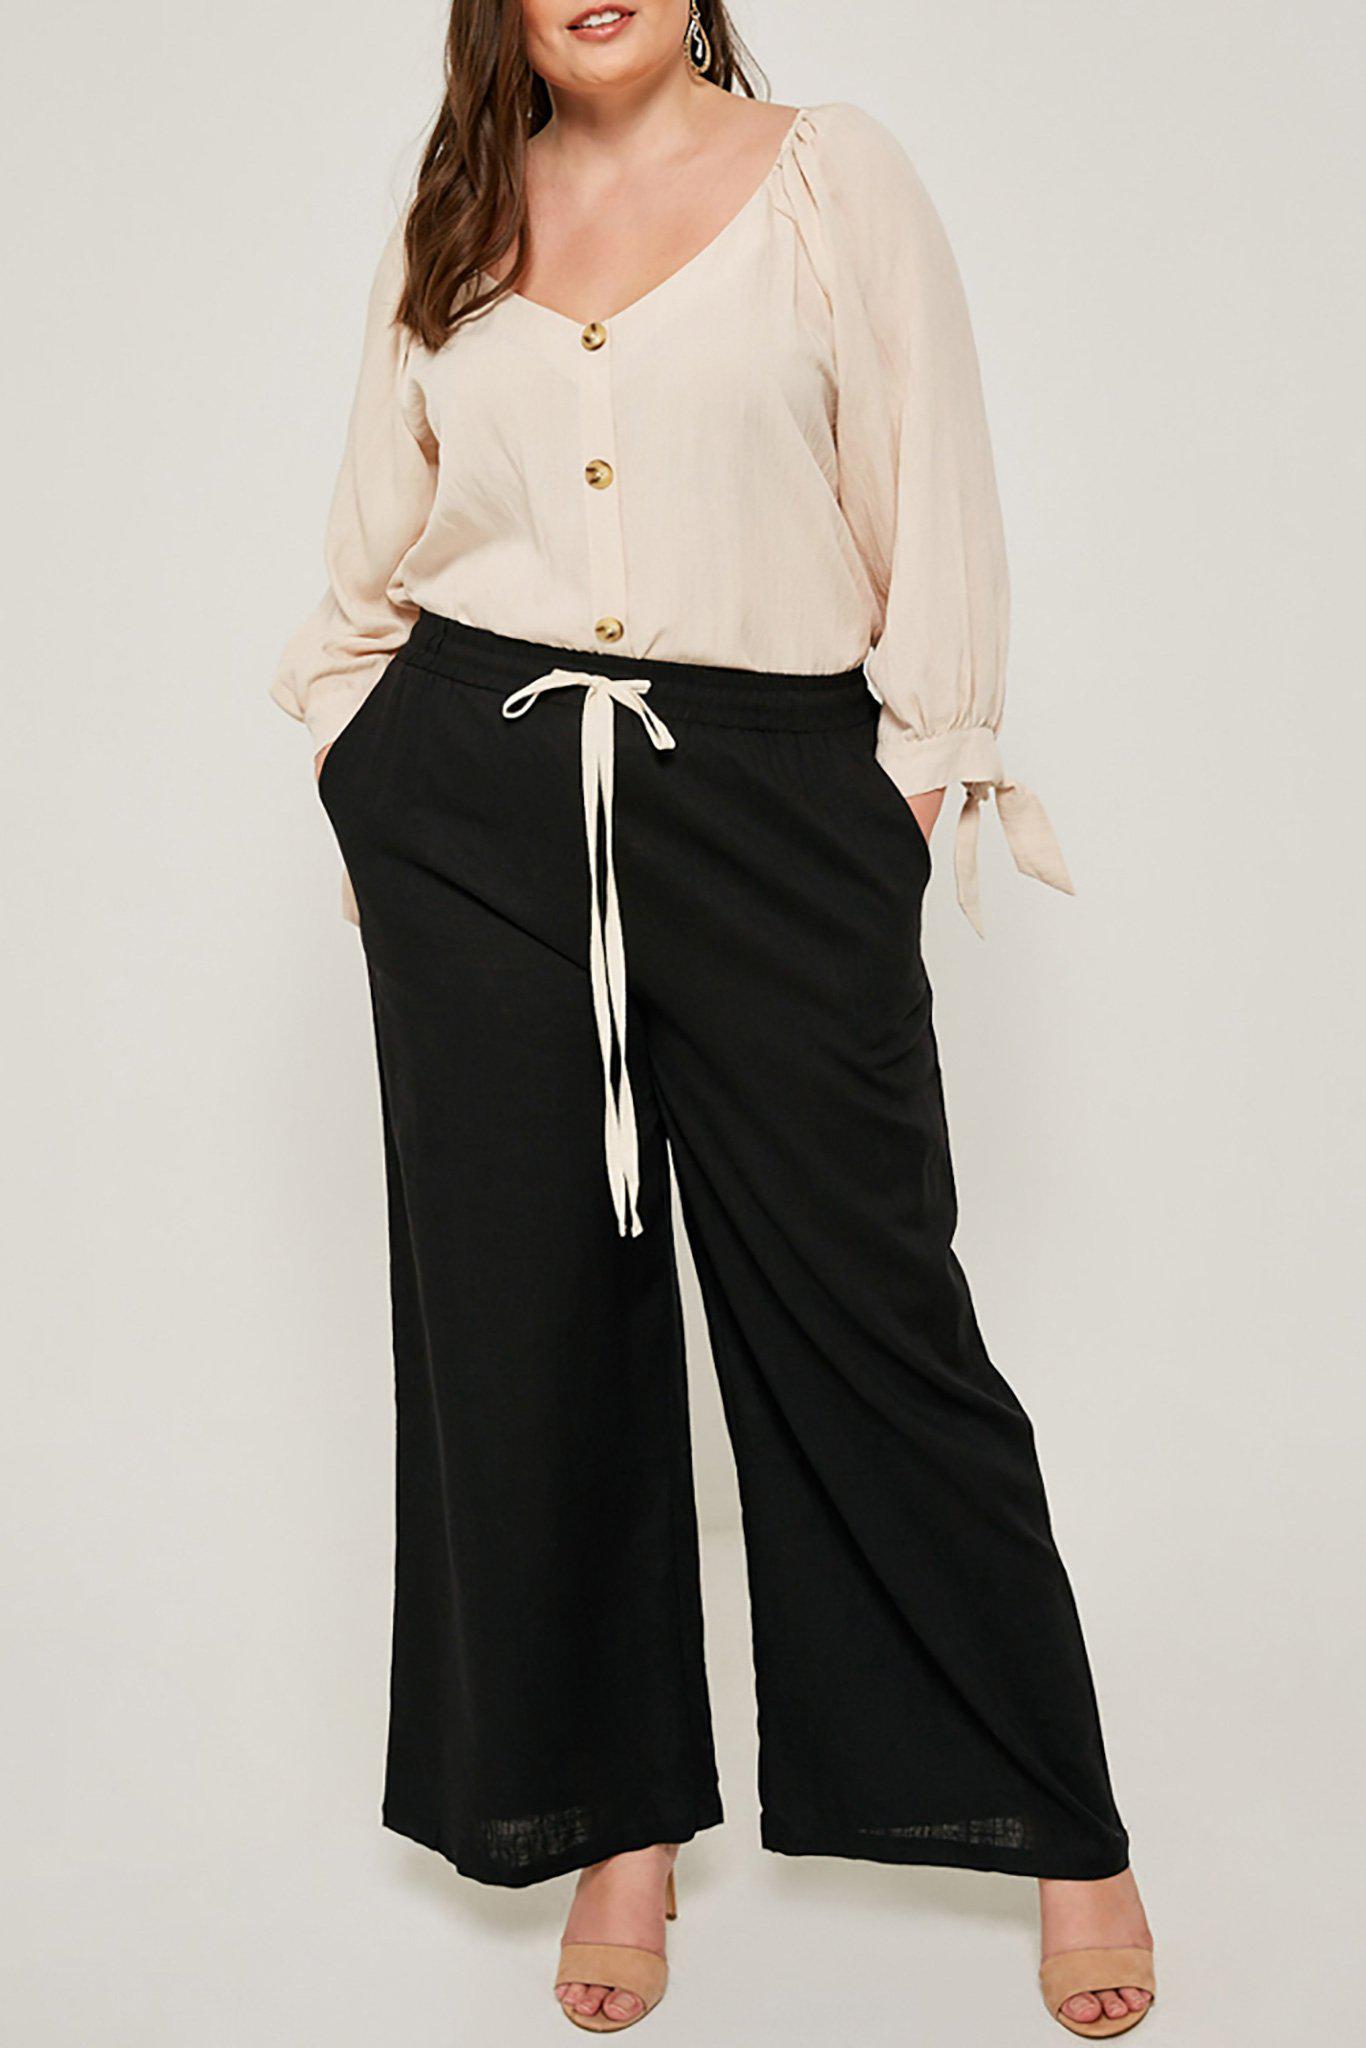 Plus-size wide leg black Madison pant full outfit view on model